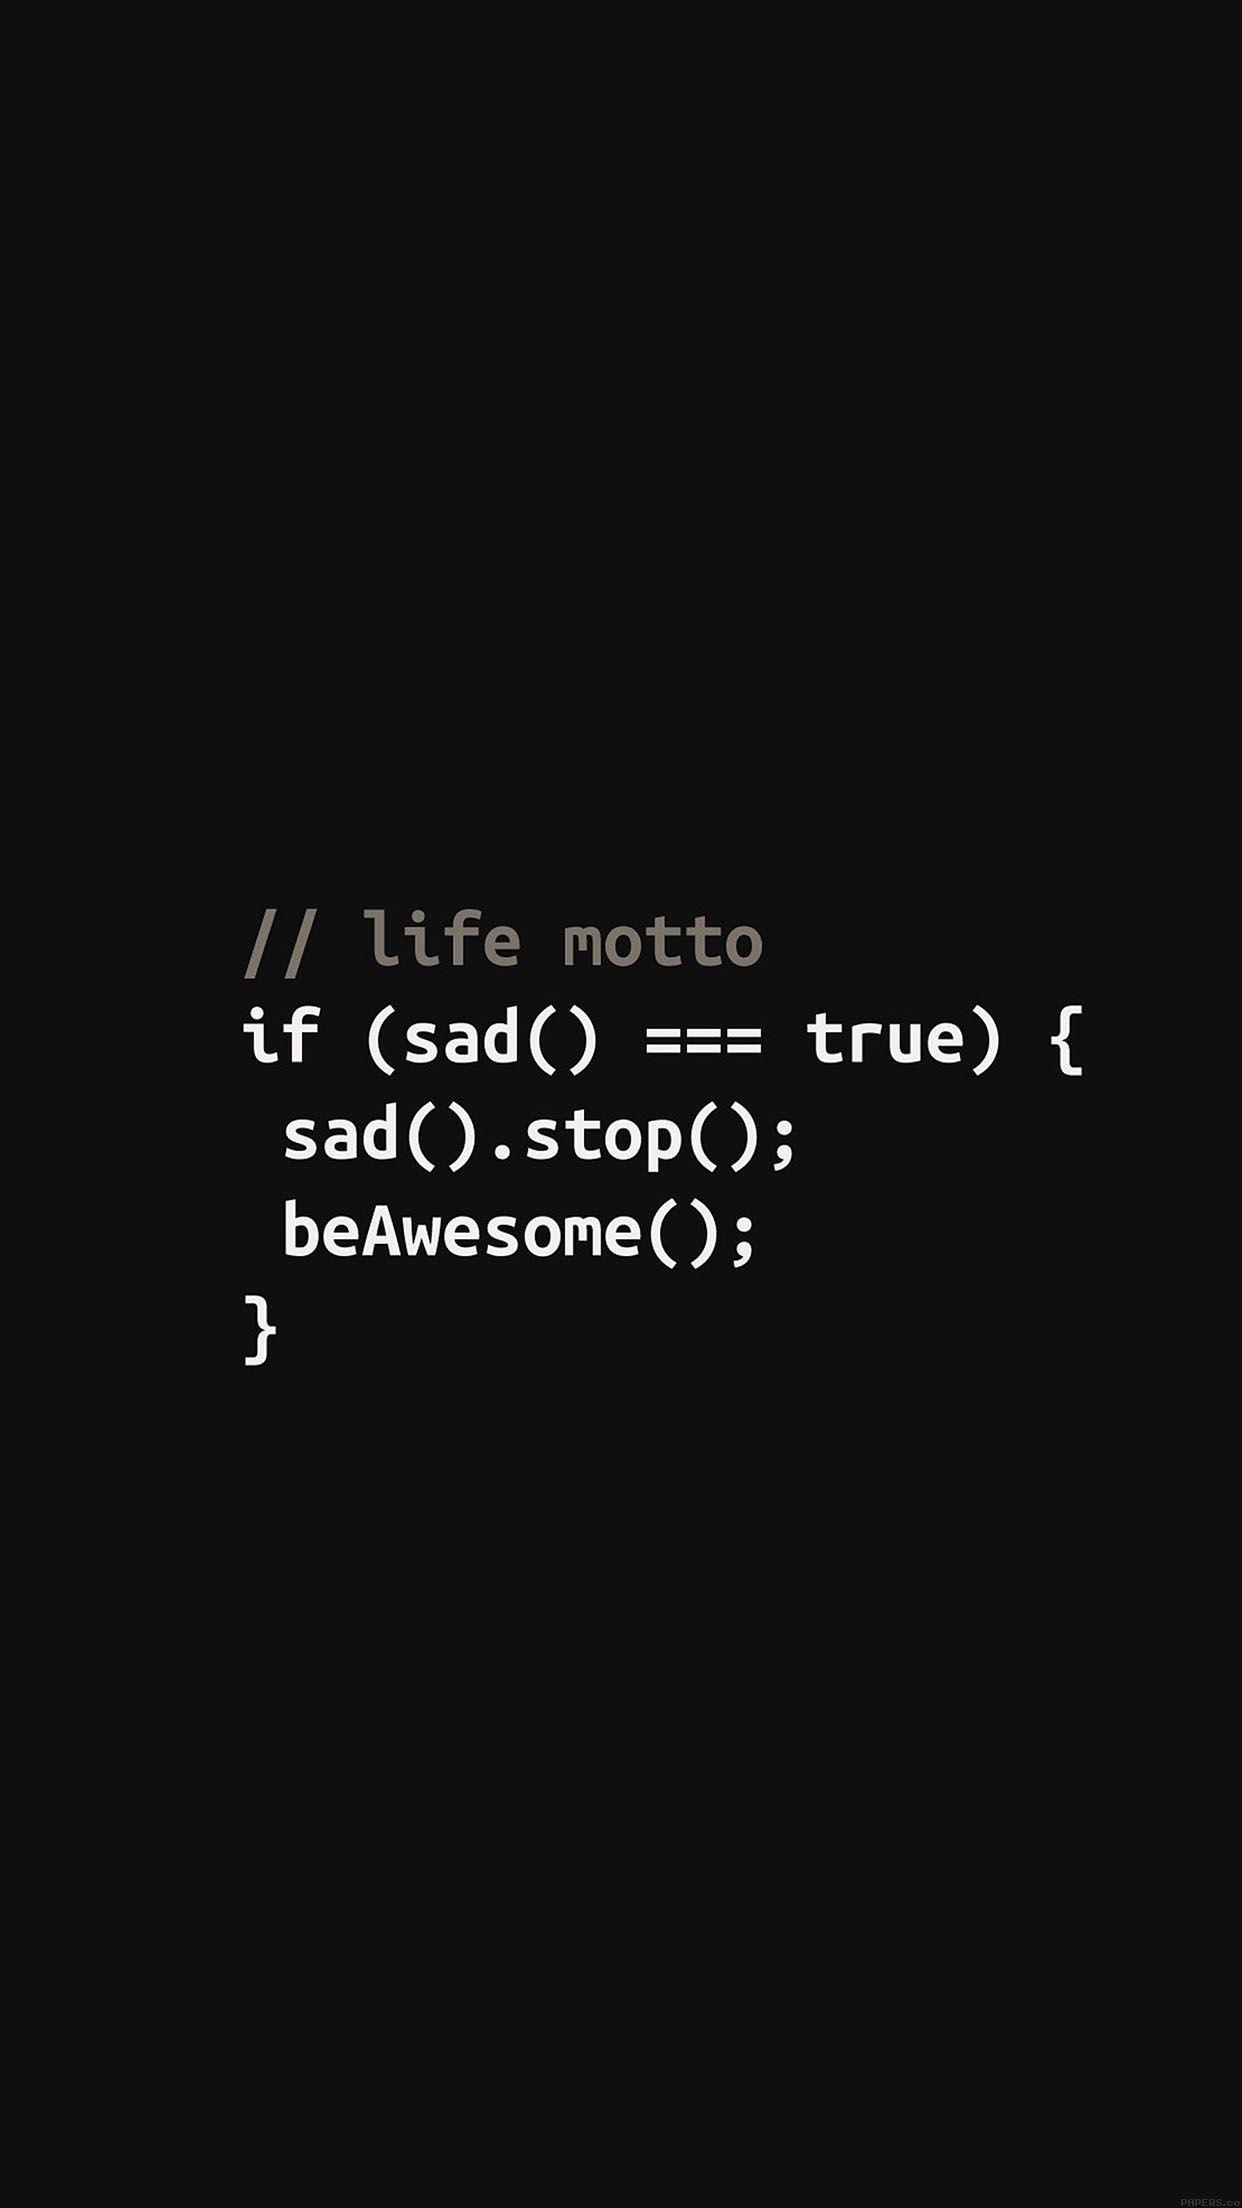 Awesome Wallpaper Programmers Life Motto Iphone6 Plus